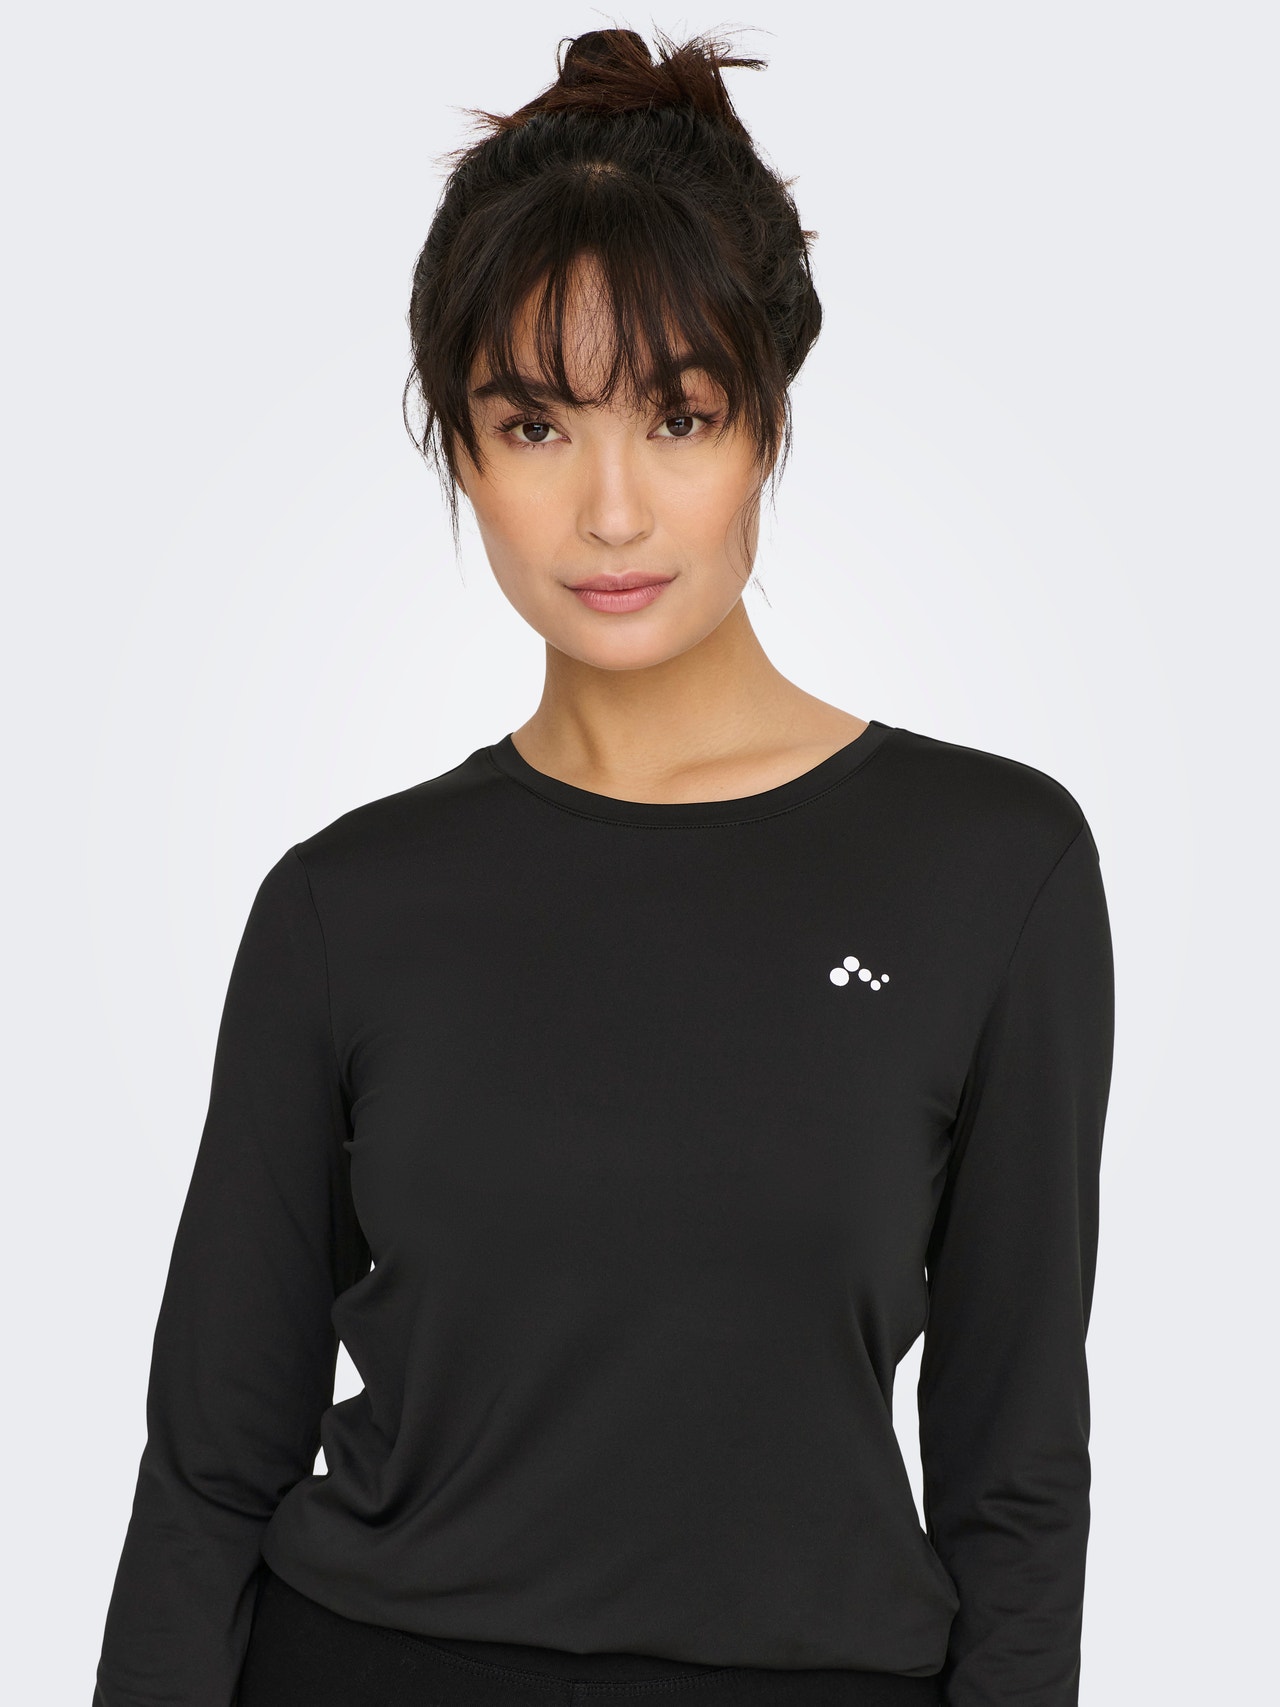 ONLY Training top with long sleeves -Black - 15281097